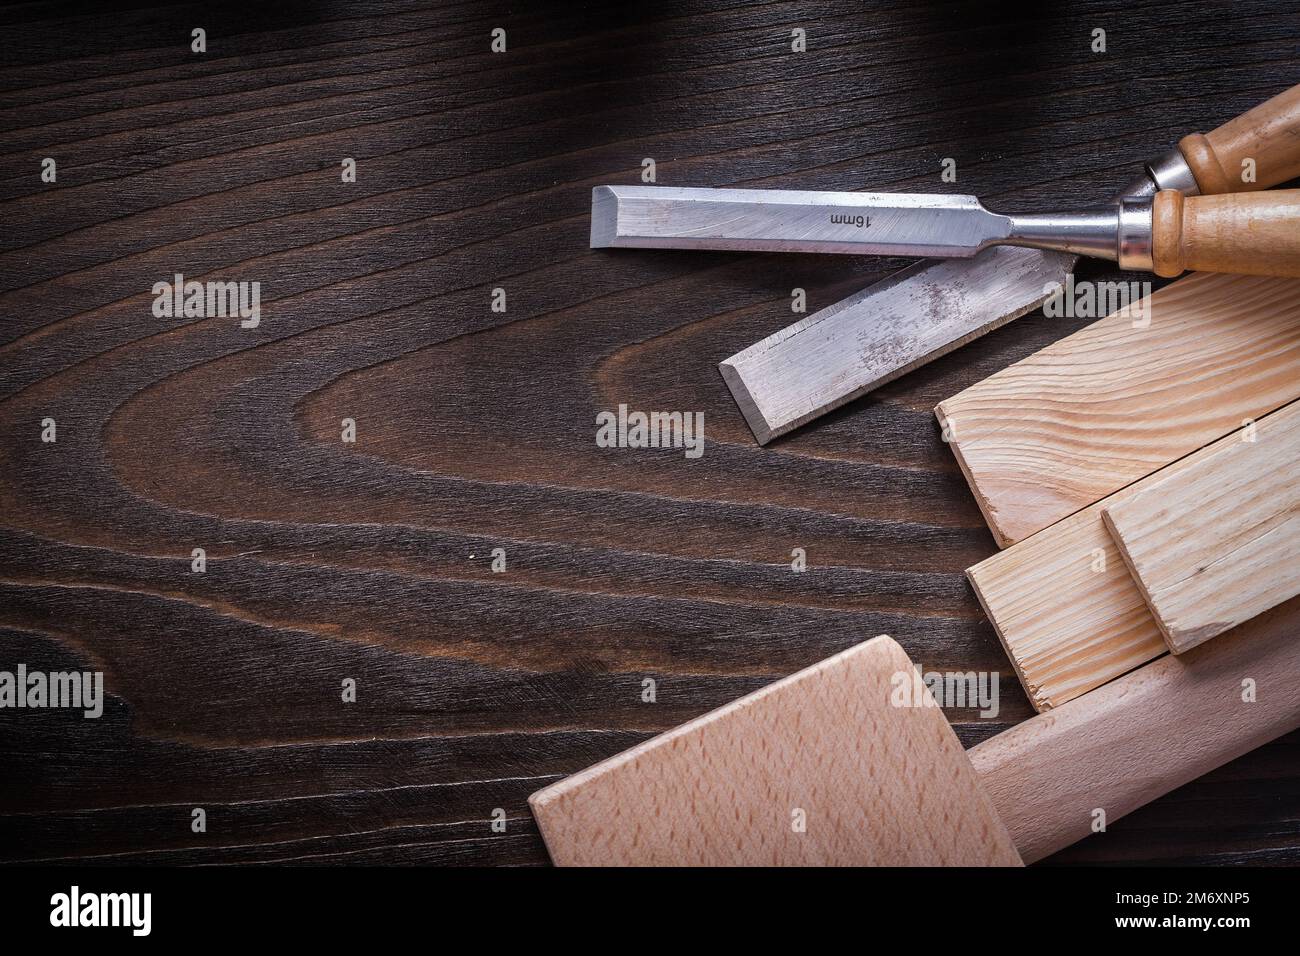 Lump hammer flat chisels and wooden bricks on brown vintage wood board copy space image construction concept. Stock Photo